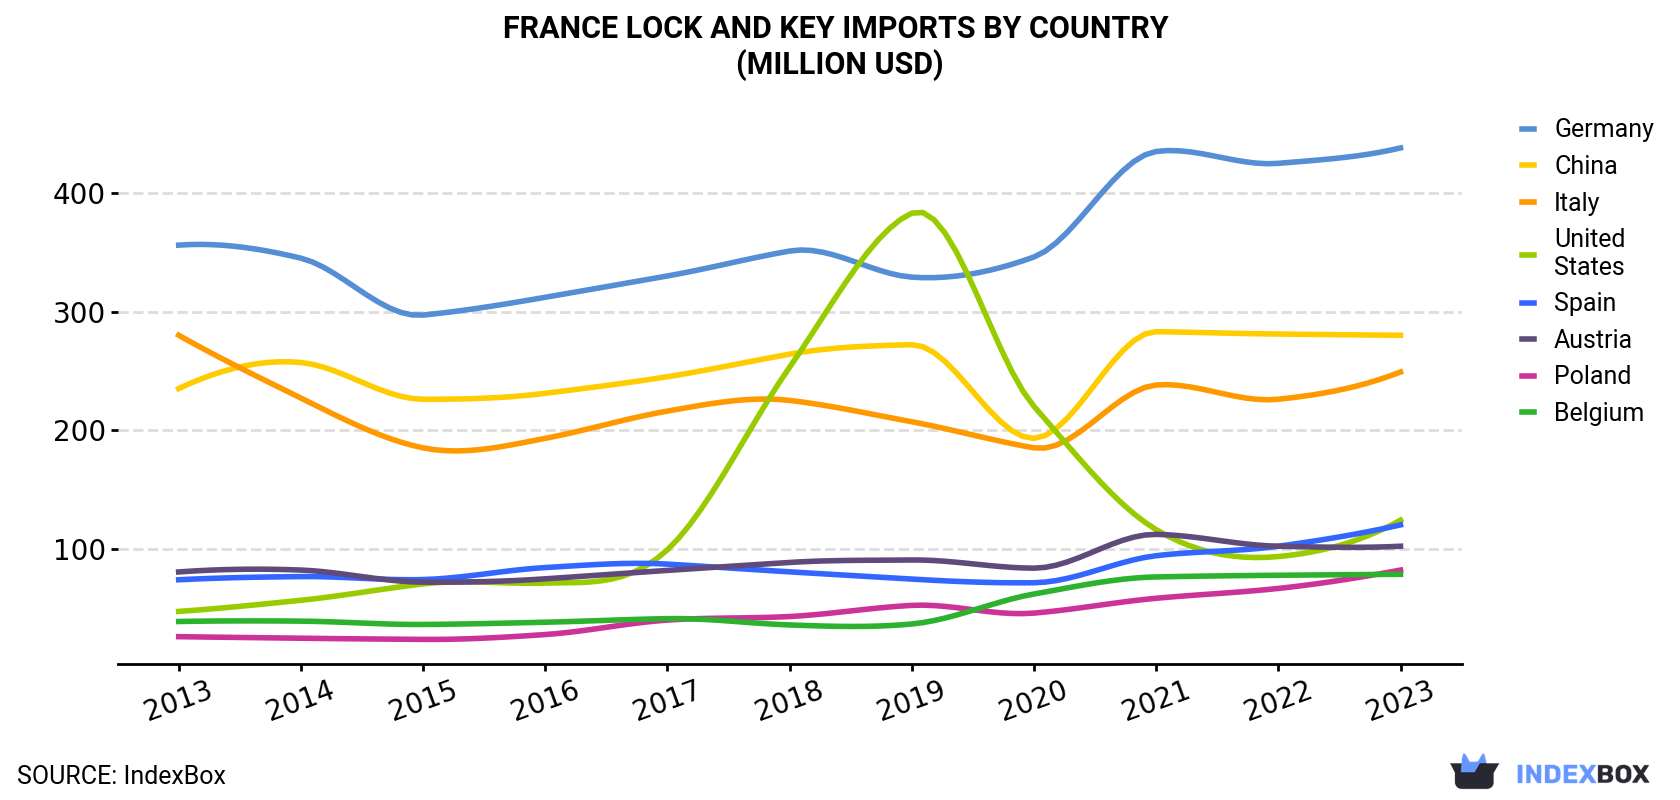 France Lock And Key Imports By Country (Million USD)